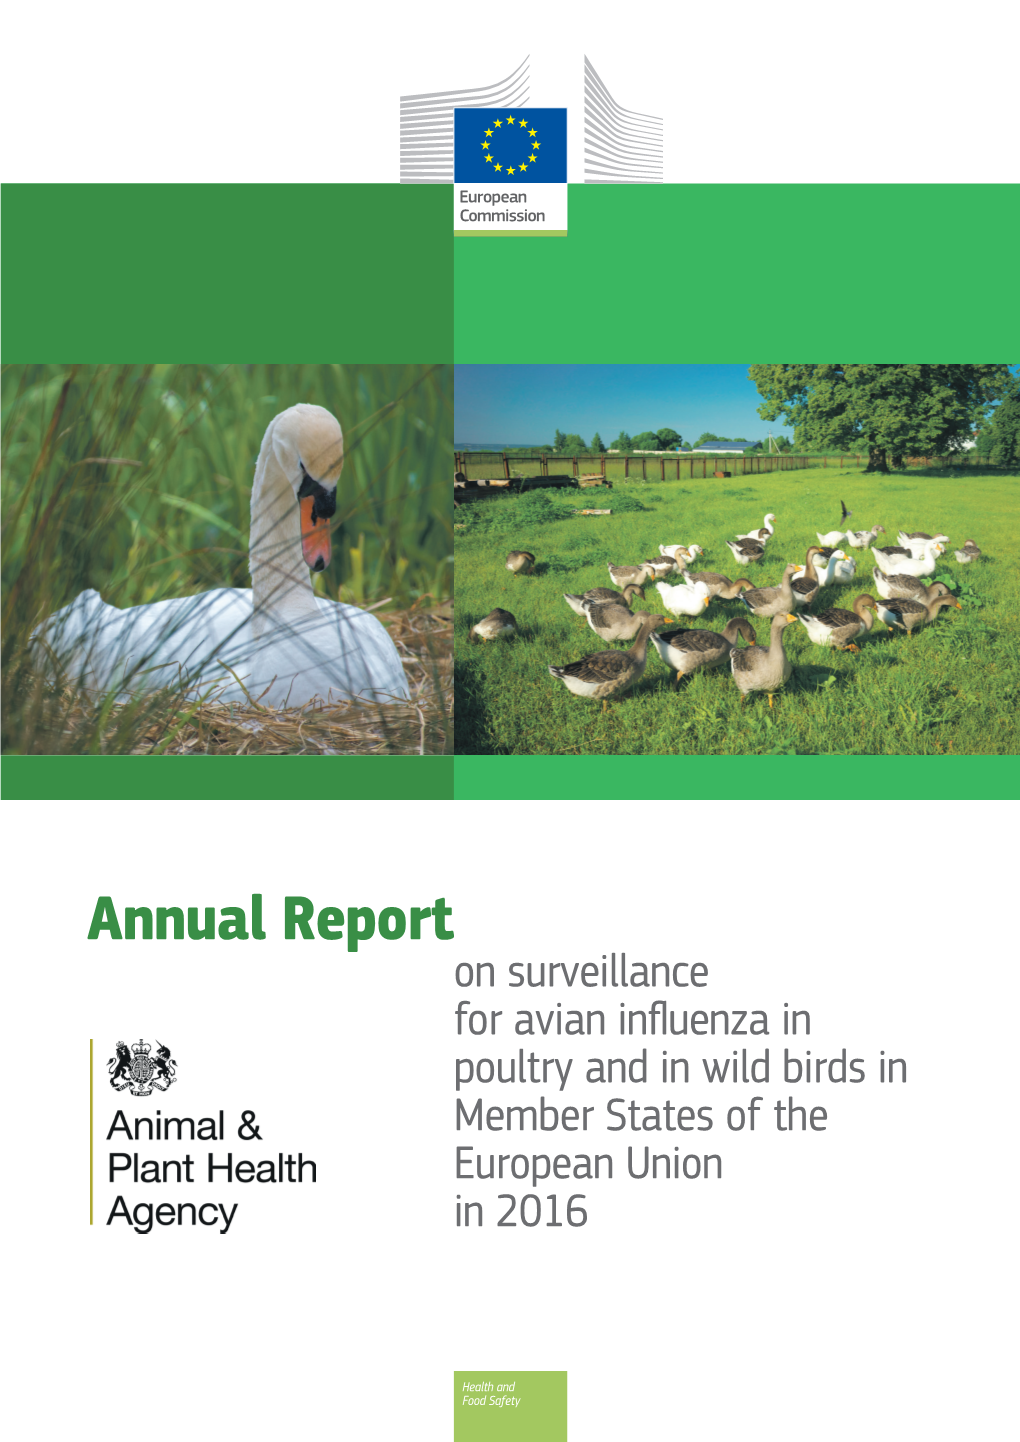 Annual Report of the Eu Poultry Surveillance For